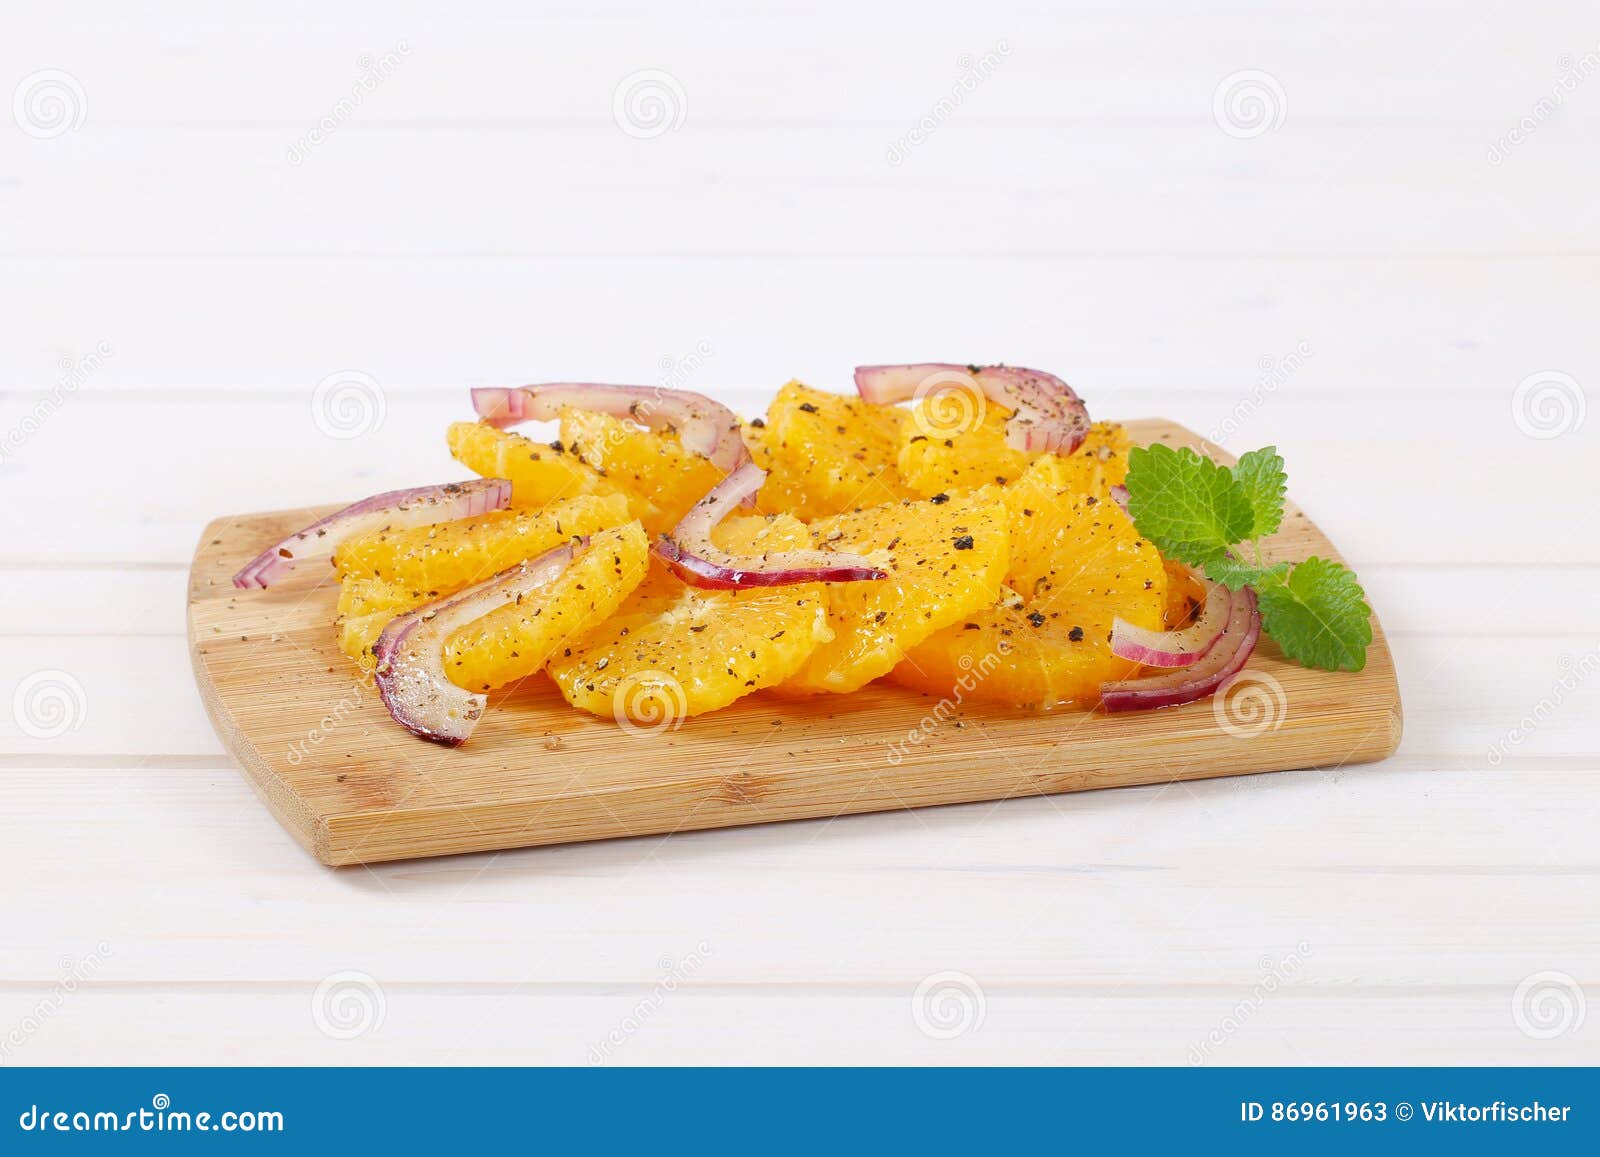 Sicilian Salad with Orange, Onion and Pepper Stock Image - Image of ...